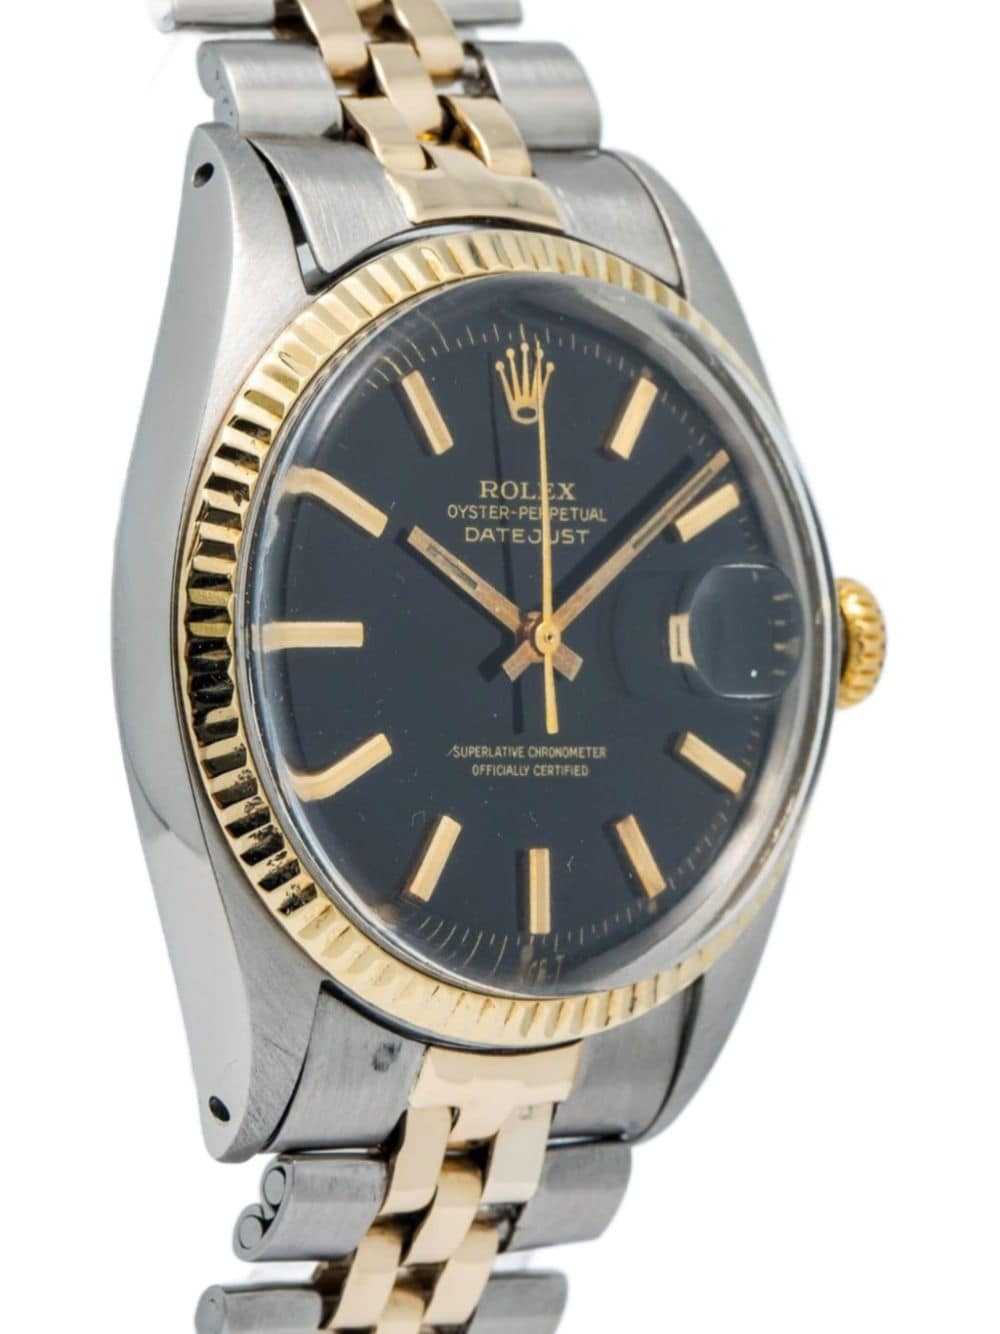 Rolex pre-owned Datejust 36mm - Black - image 4